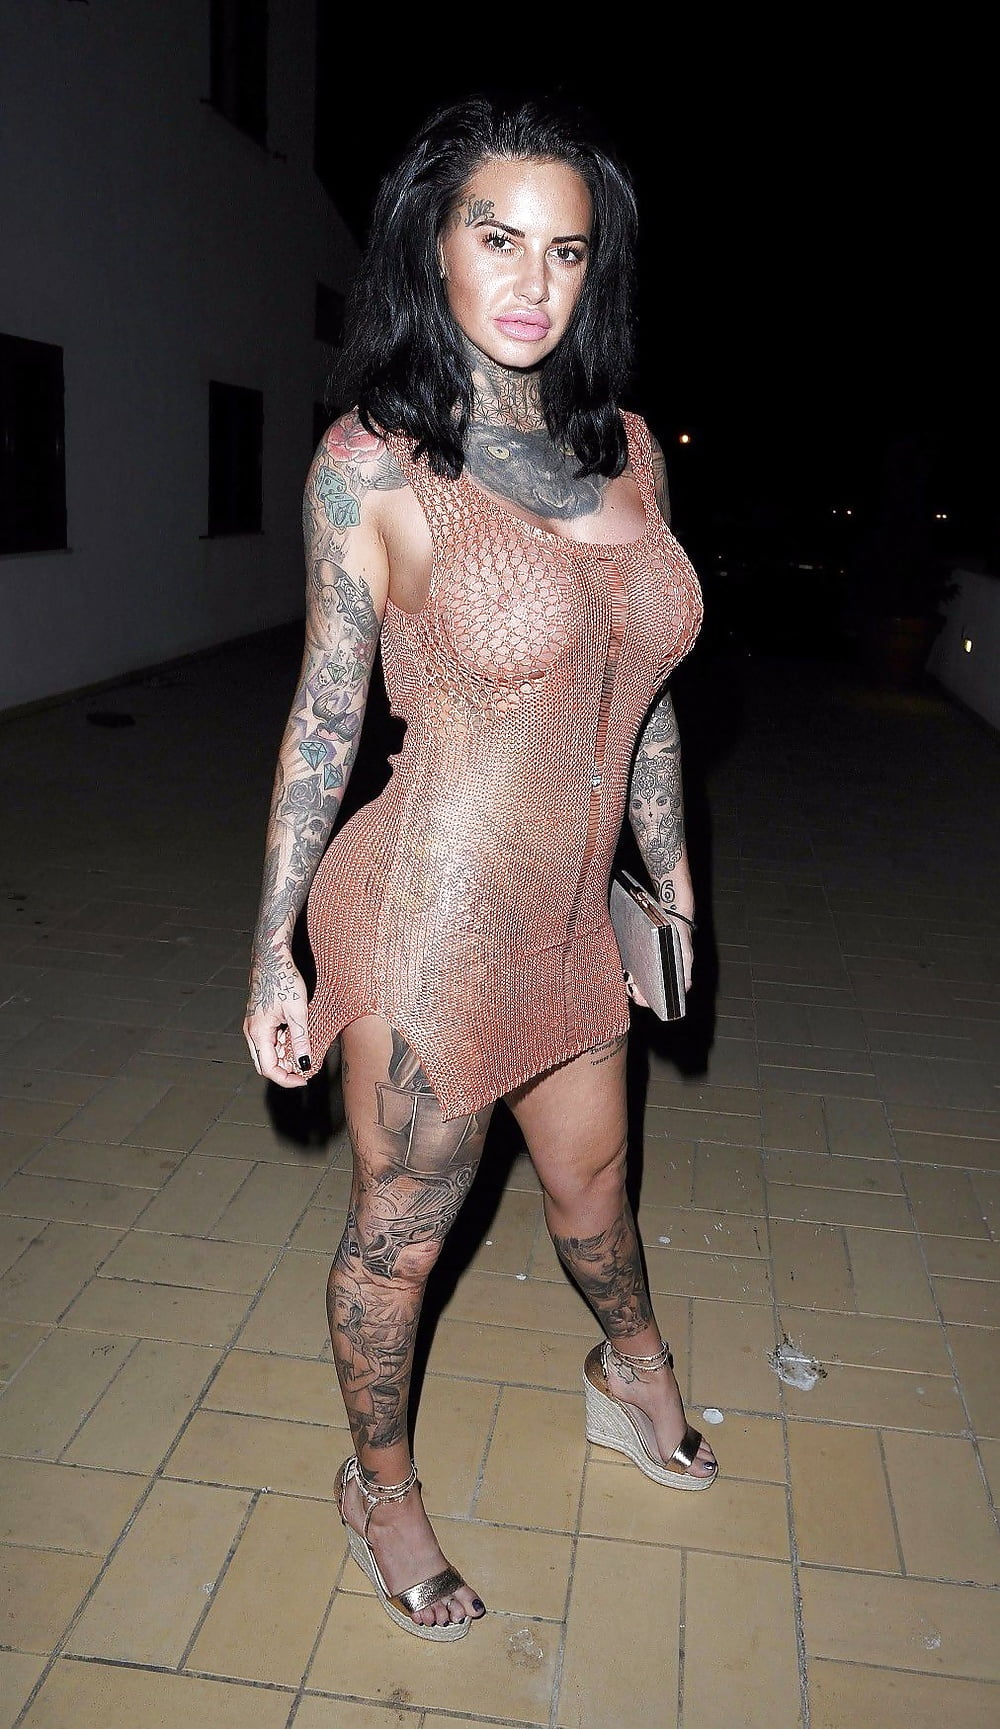 Jemma lucy looking hot in see thru dress  (4/14)